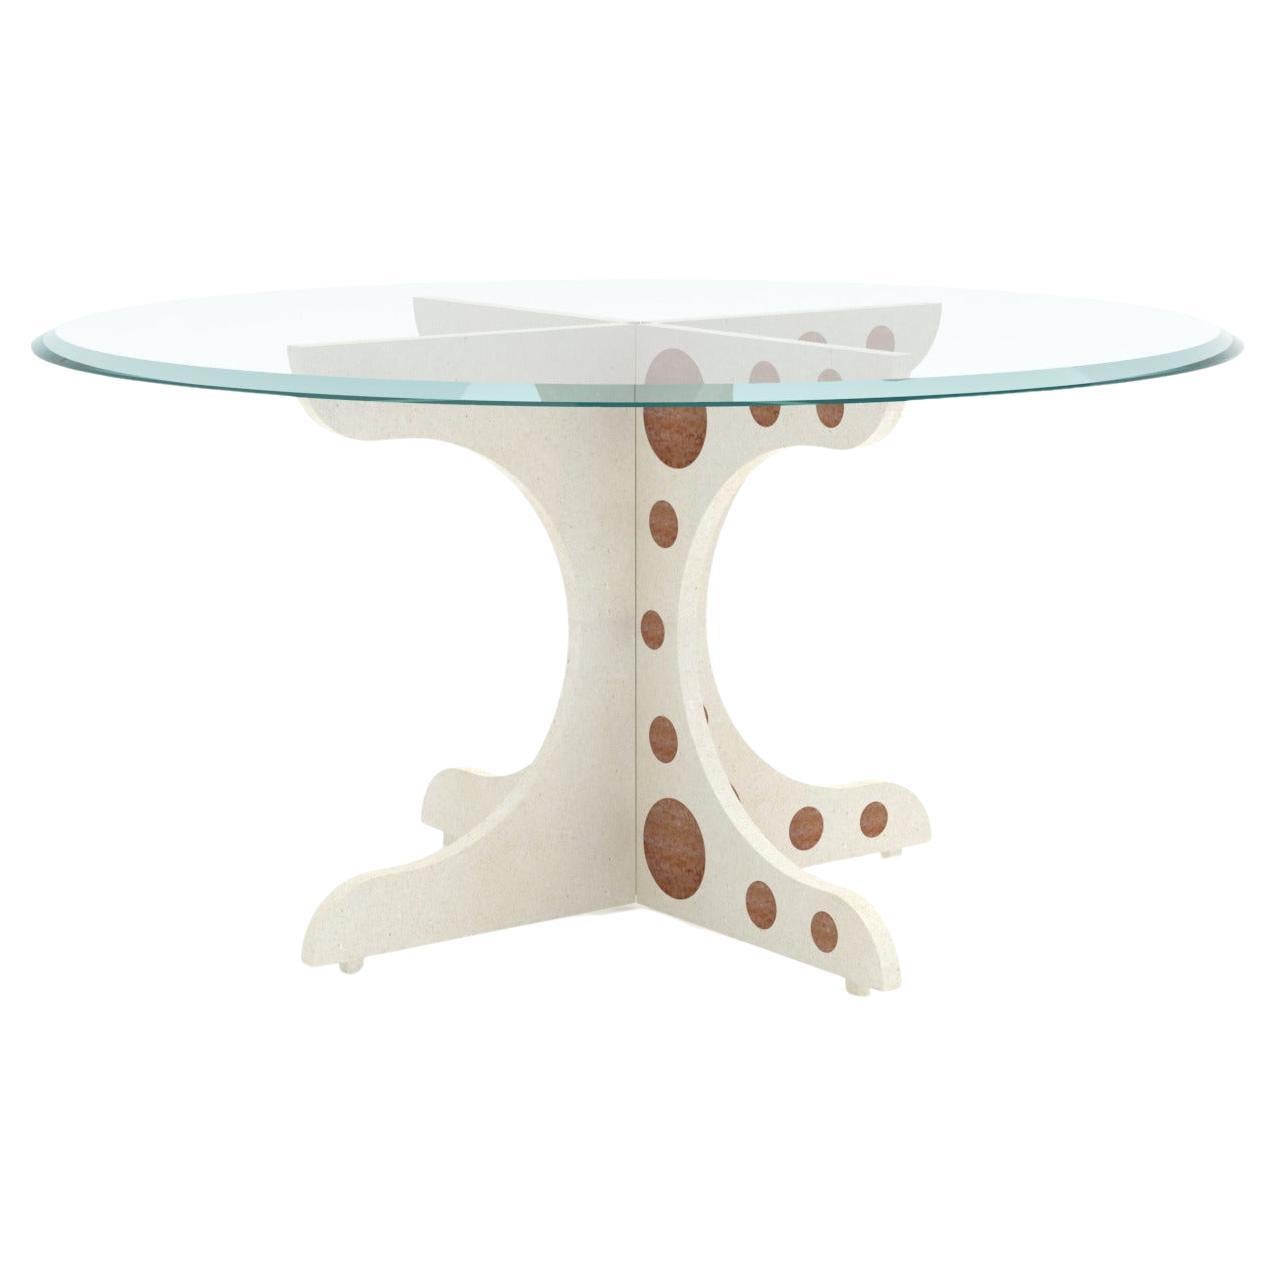 Ma-Mi, 21st Century Veselye Marble and Glass Round Table - Filling holes For Sale